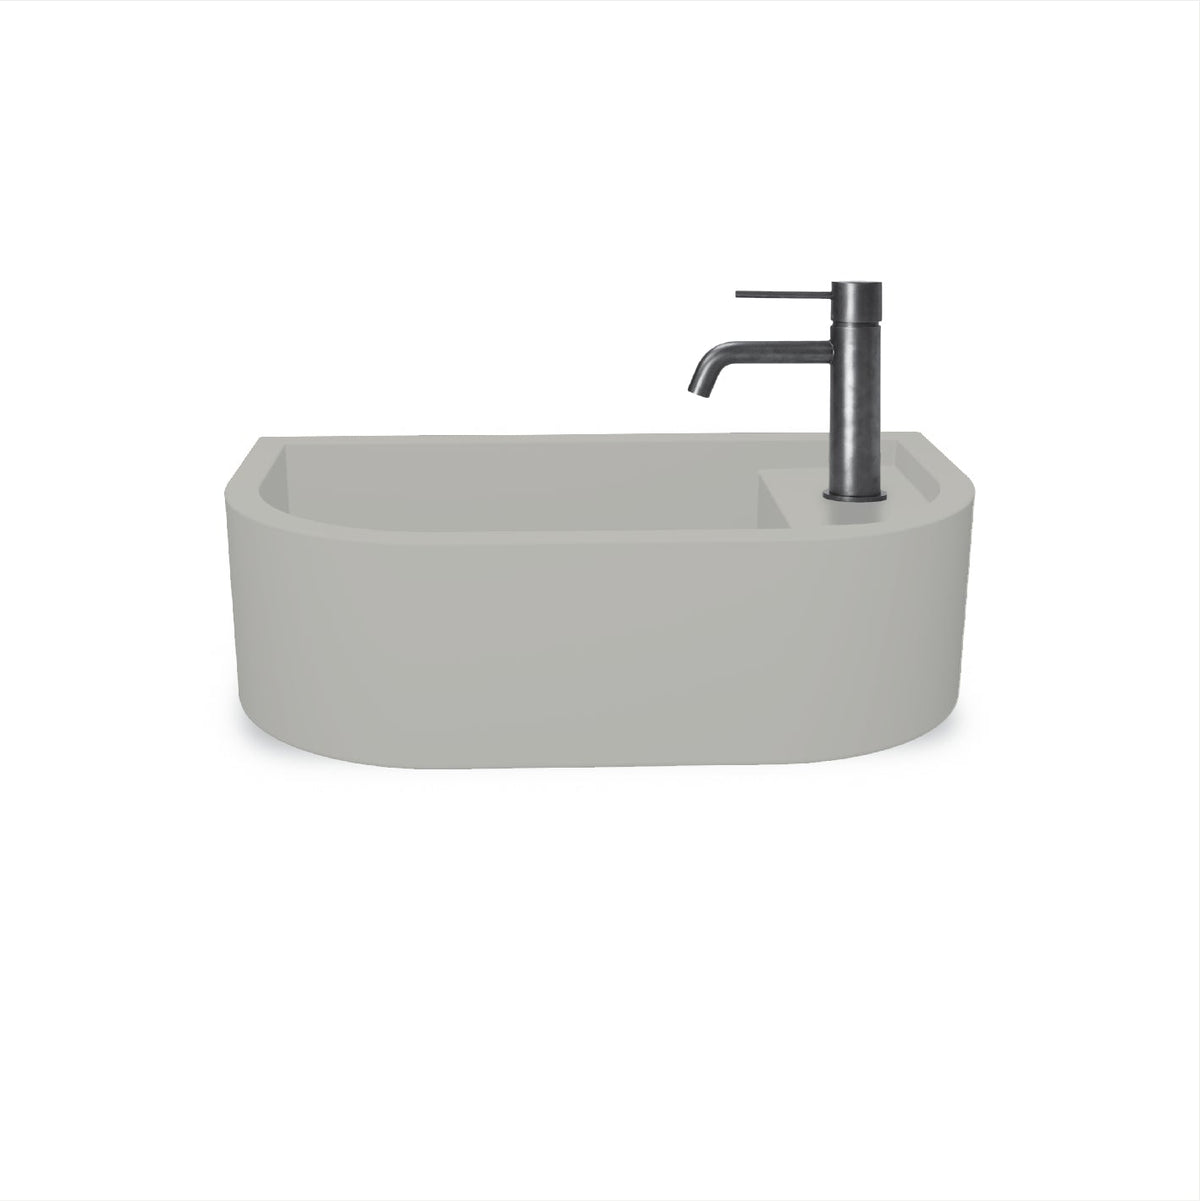 Loop 01 Basin - Overflow - Wall Hung (Ivory,Tap Hole,Chrome)